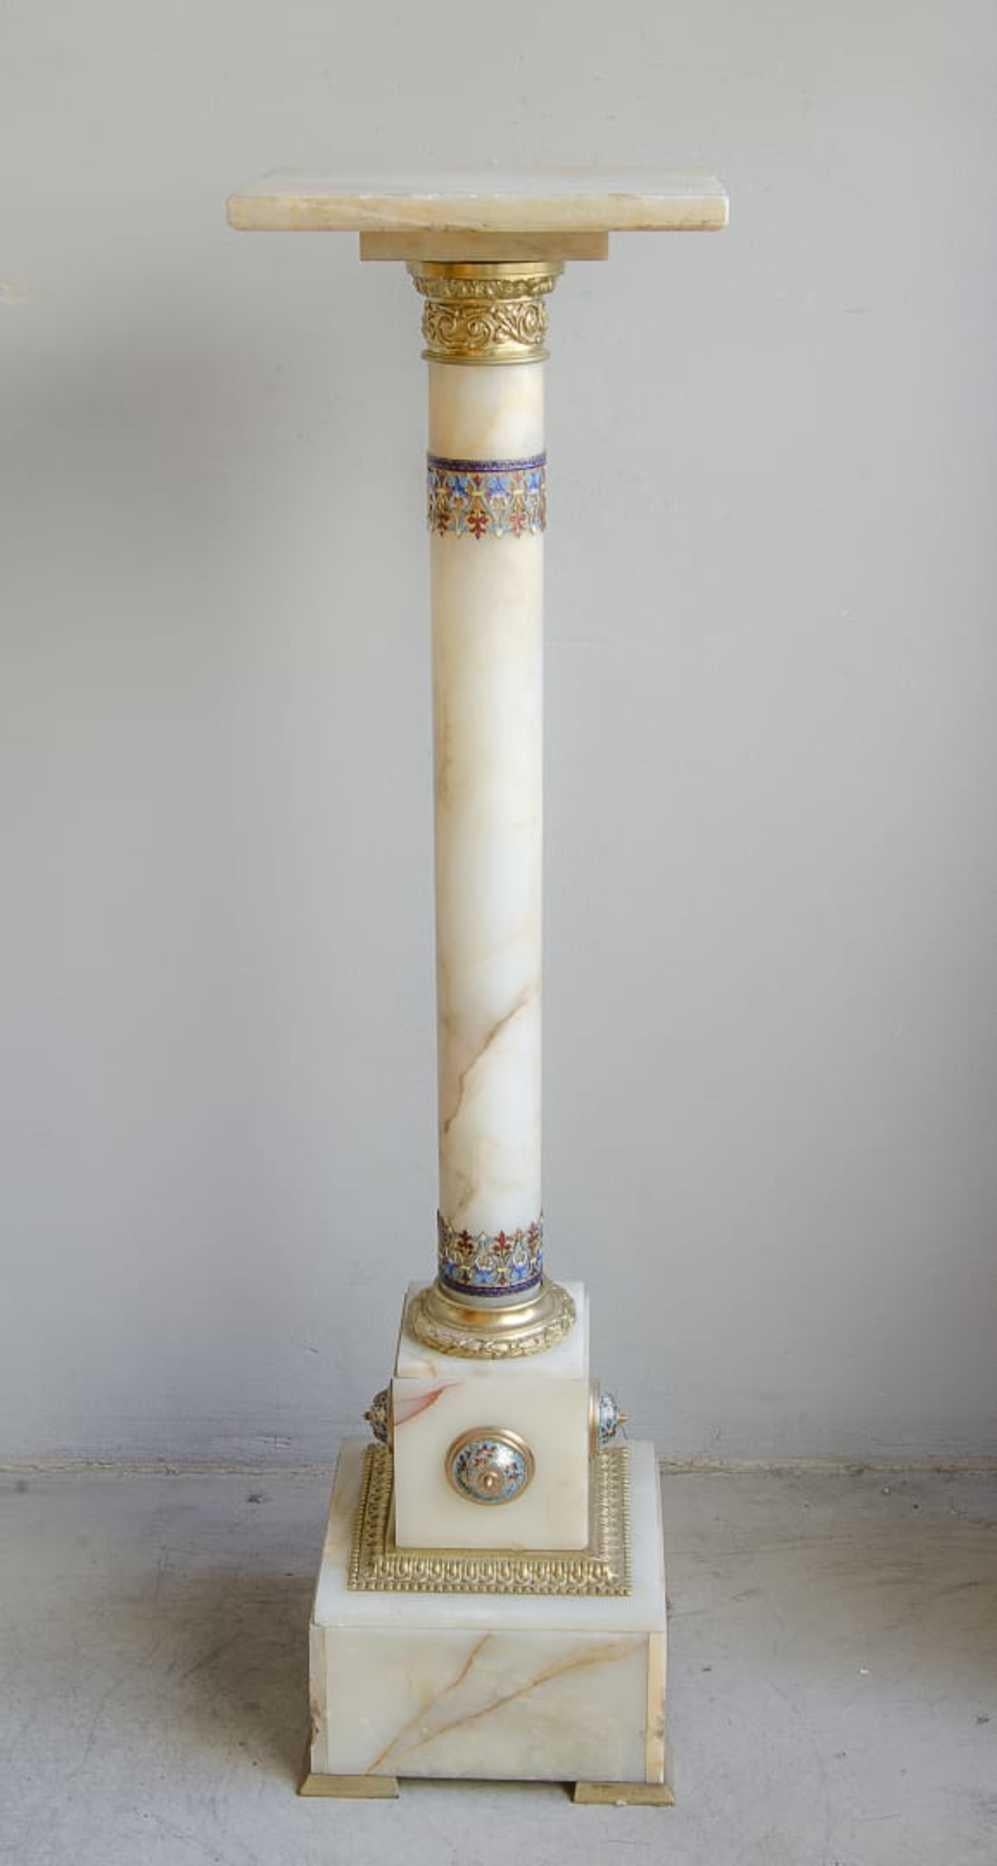 Napoleon III column
bronze, marble and cloisone enamel
Origin France of the 19th century
perfect condition.
The Napoleon III style had its heyday during the 1850s and 1880s. Emperor Napoleon wanted to emulate the lavishness and elegance of the First